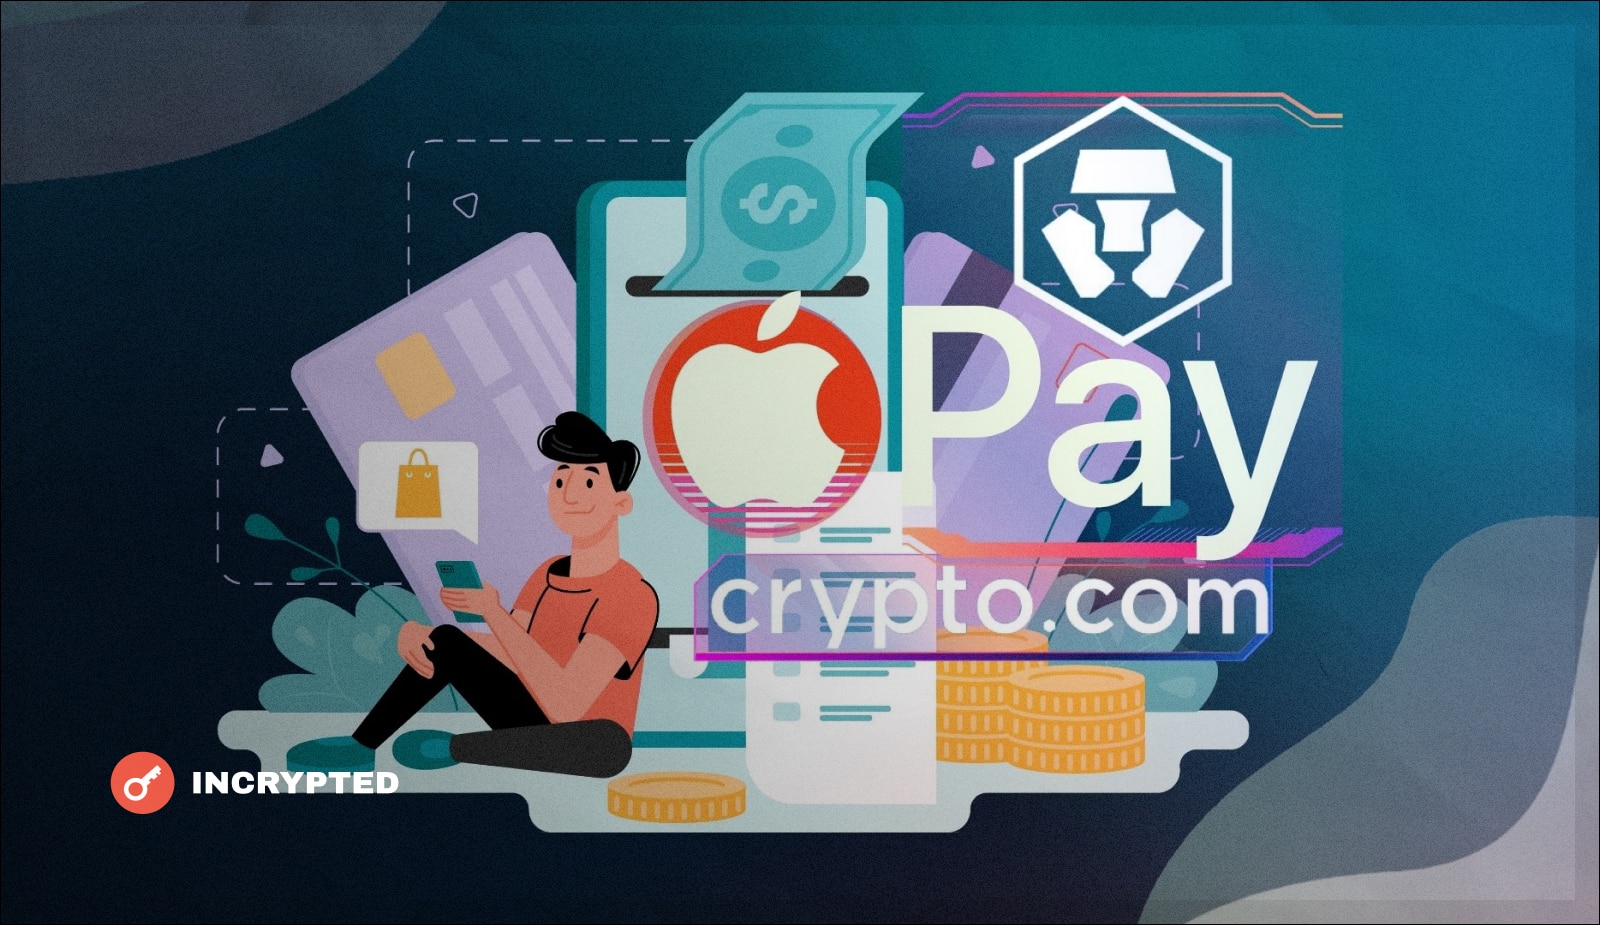 does crypto.com card work with apple pay